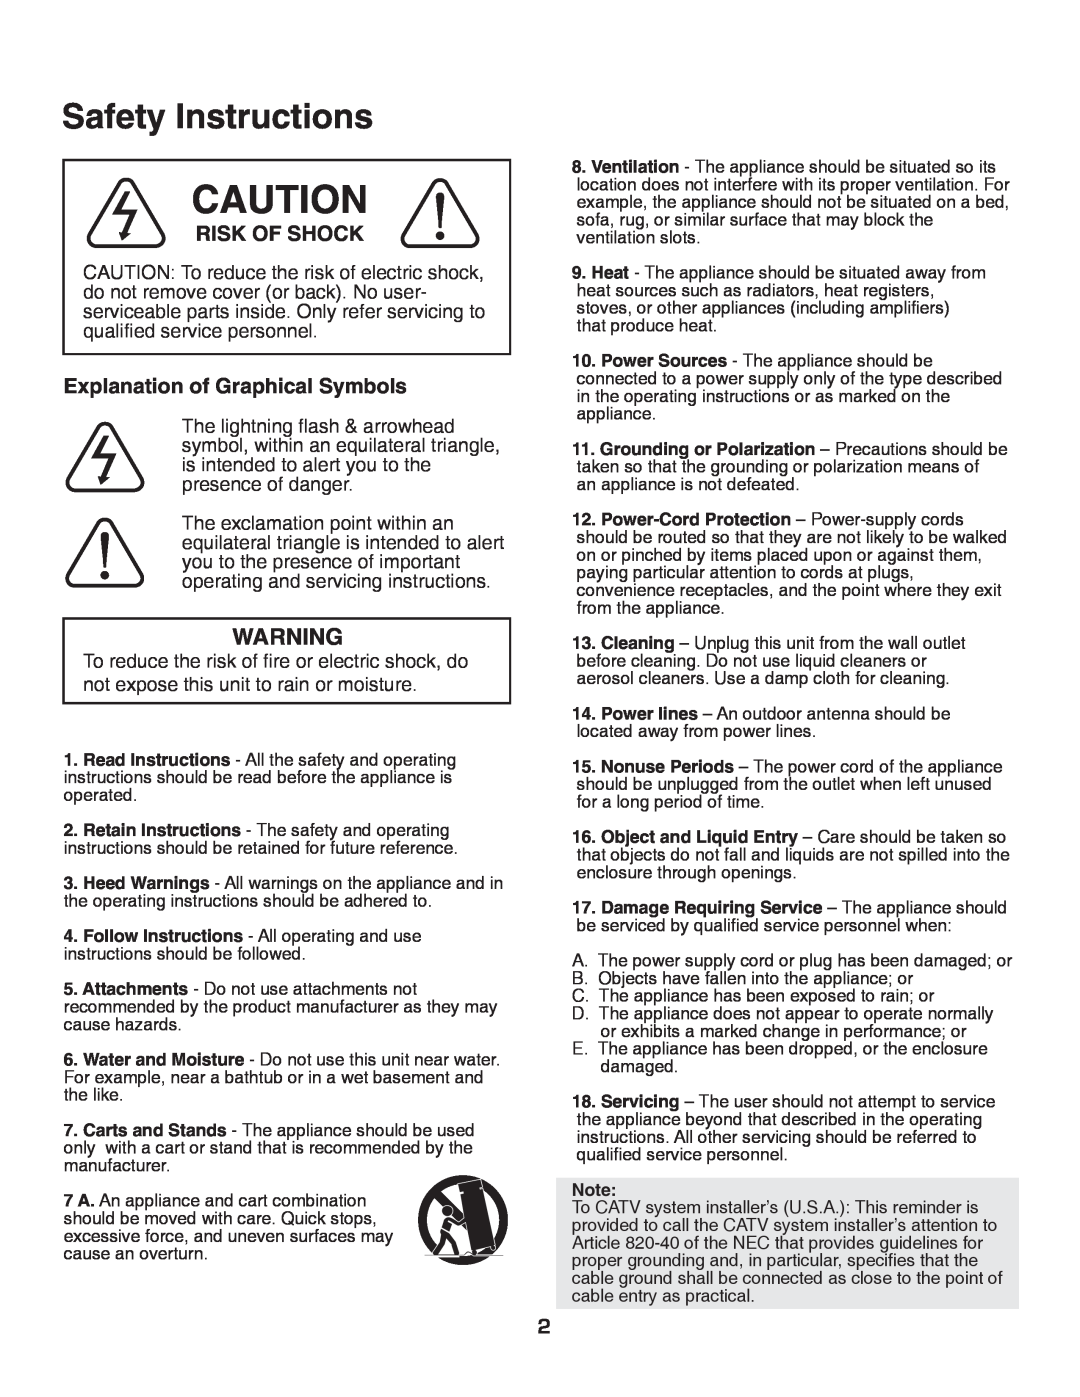 VocoPro DA-3800 PRO owner manual Safety Instructions, Risk Of Shock, Explanation of Graphical Symbols 